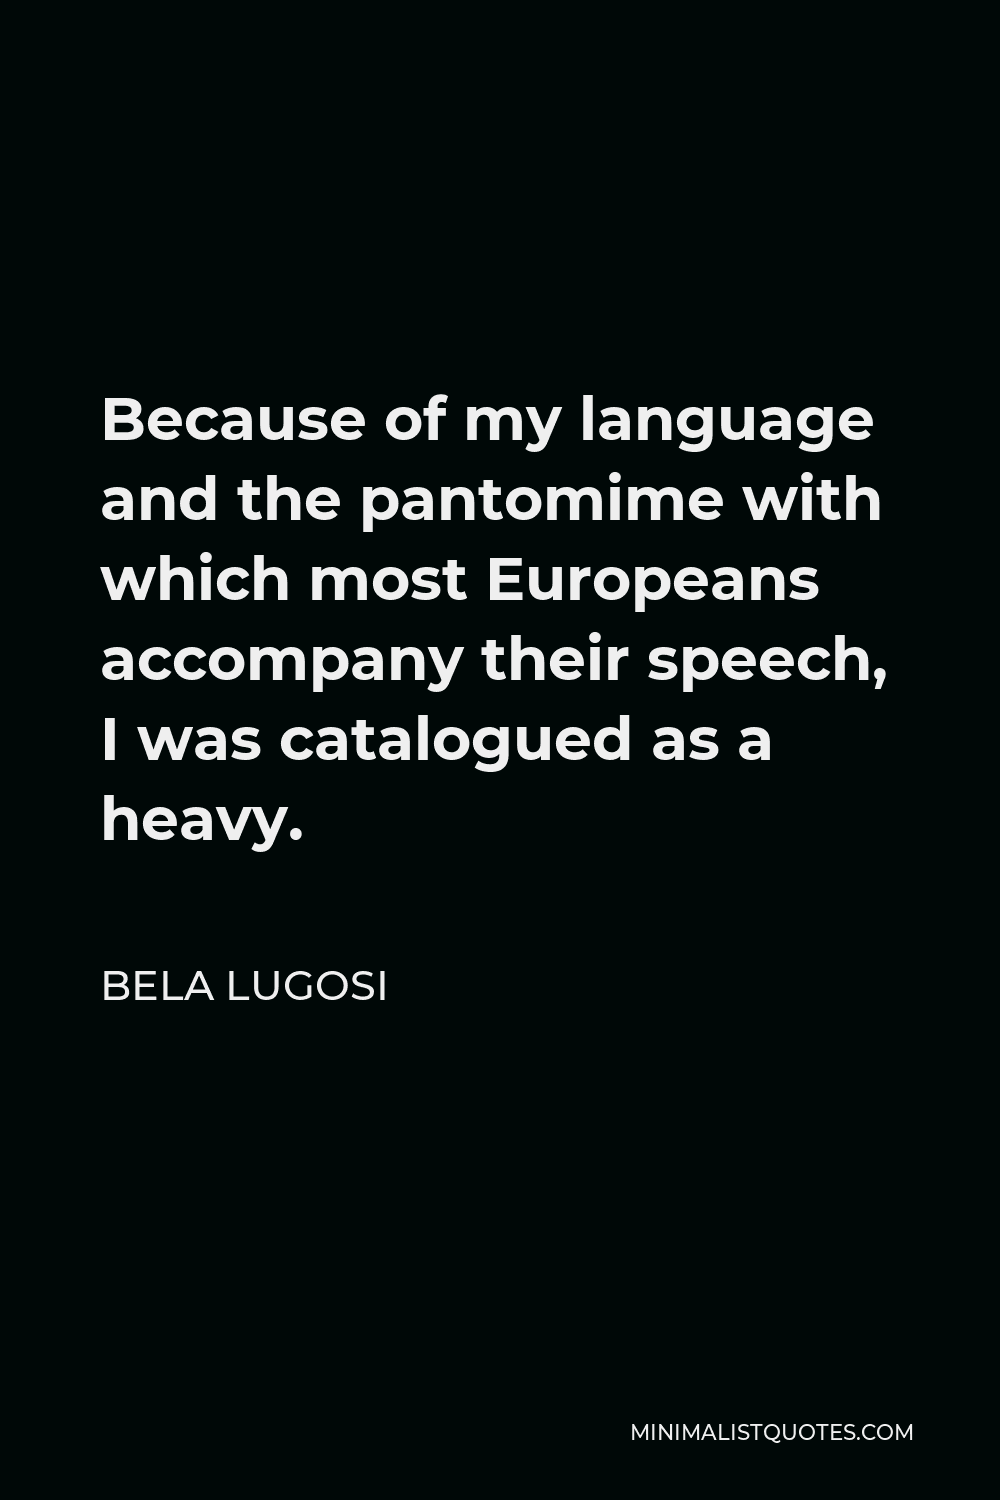 Bela Lugosi Quote - Because of my language and the pantomime with which most Europeans accompany their speech, I was catalogued as a heavy.